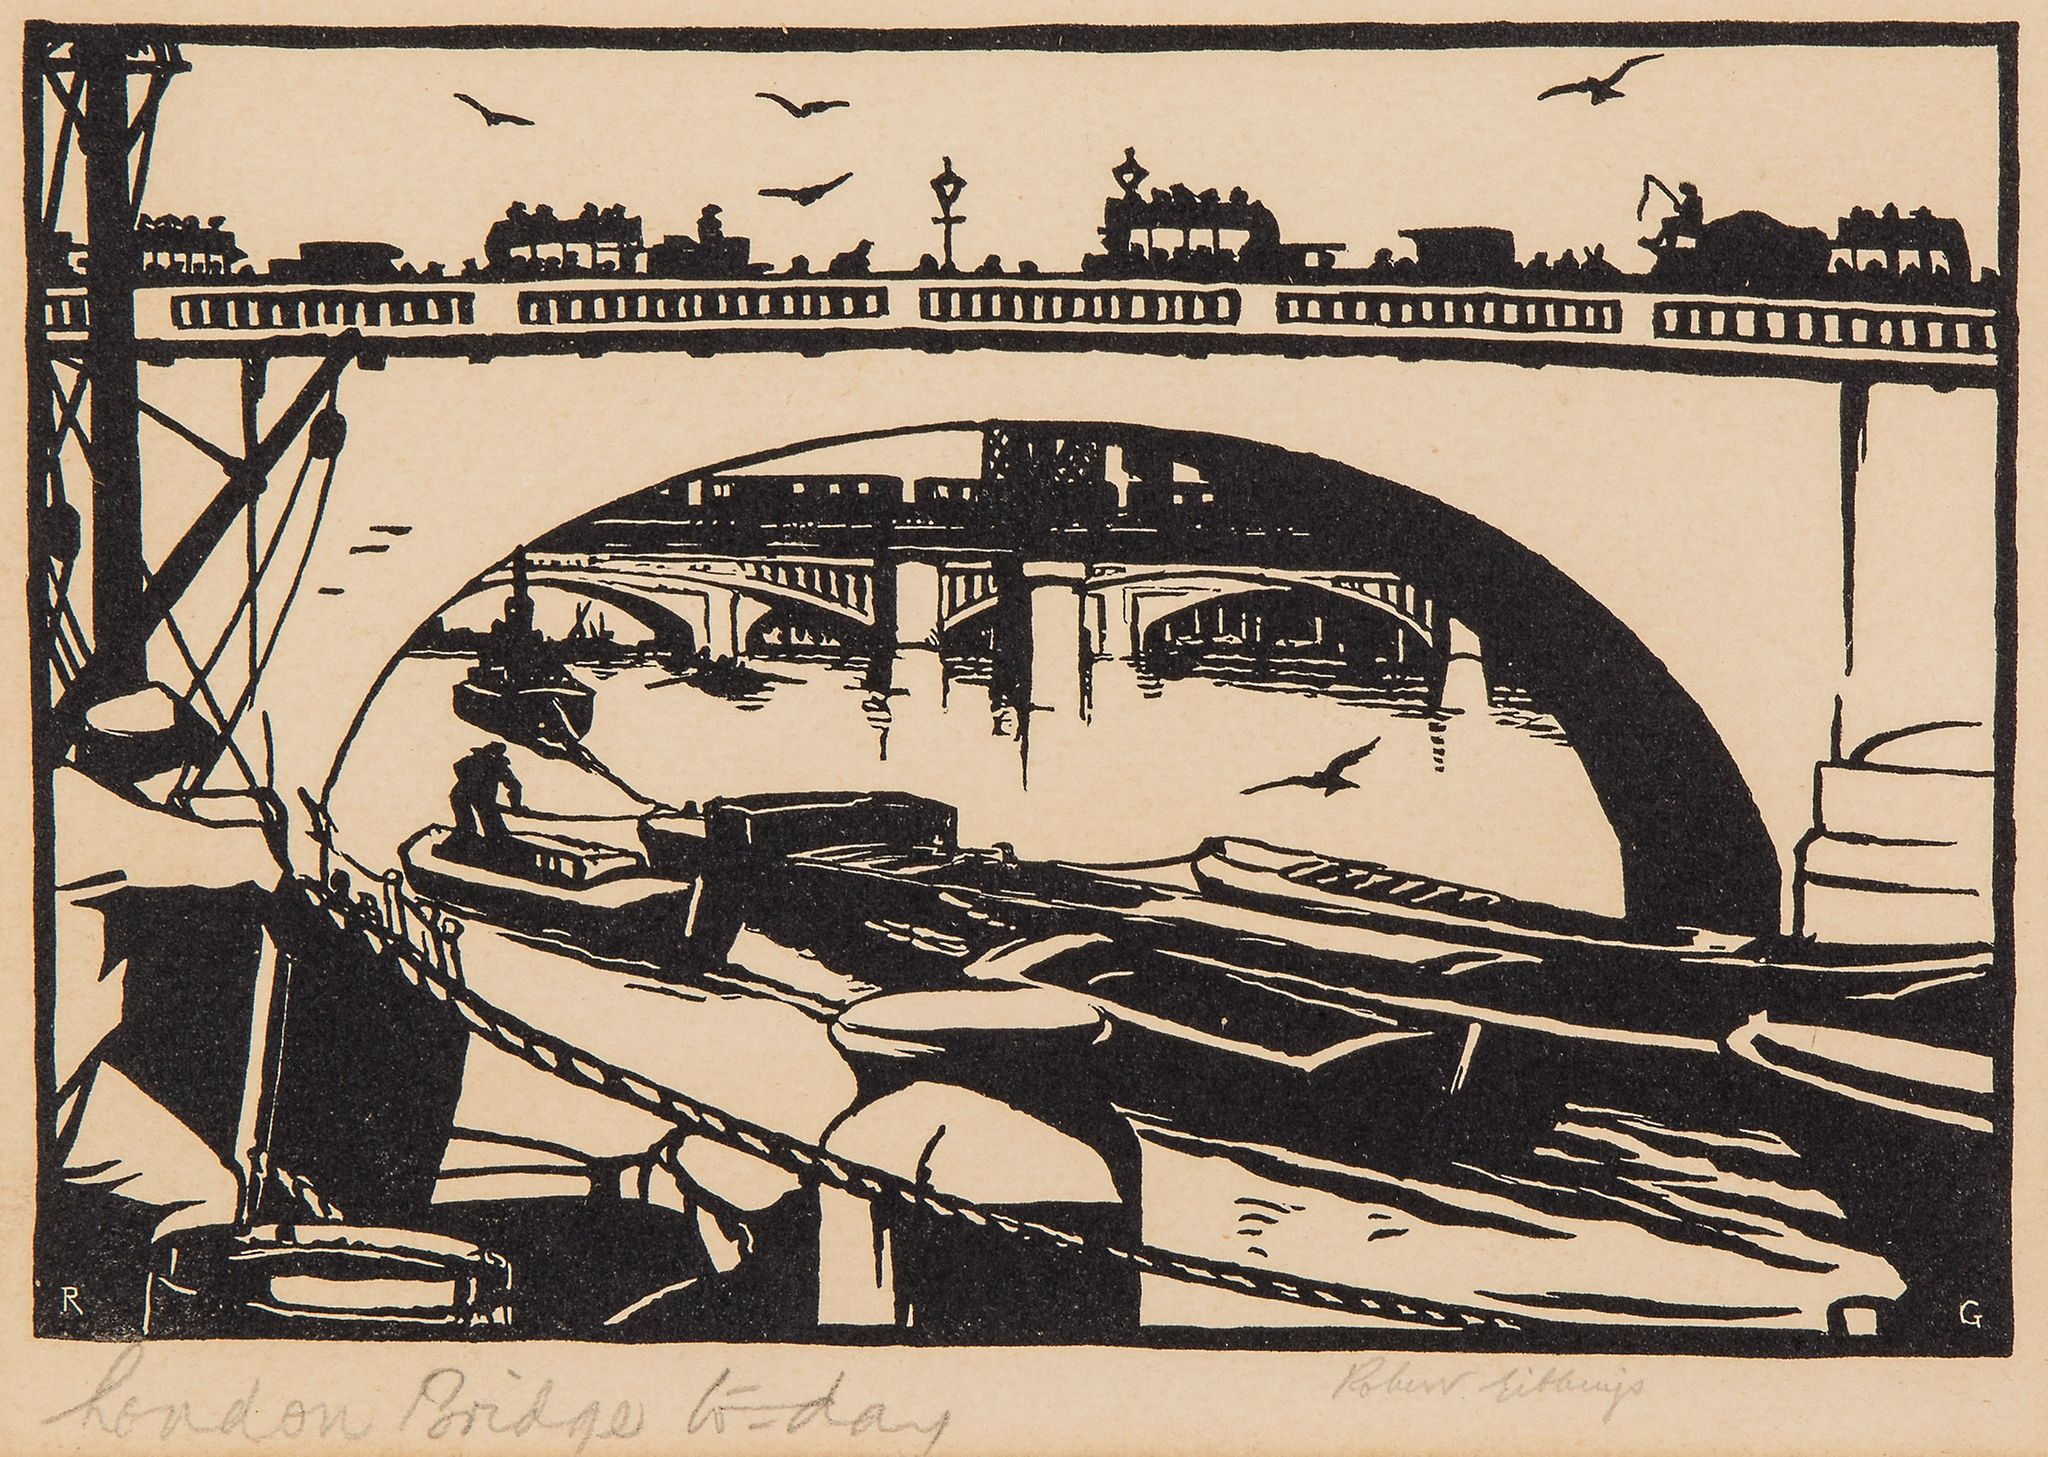 Robert Gibbings (1889-1958) - Views of London (4 works) four woodcuts, each signed and titled 'Old